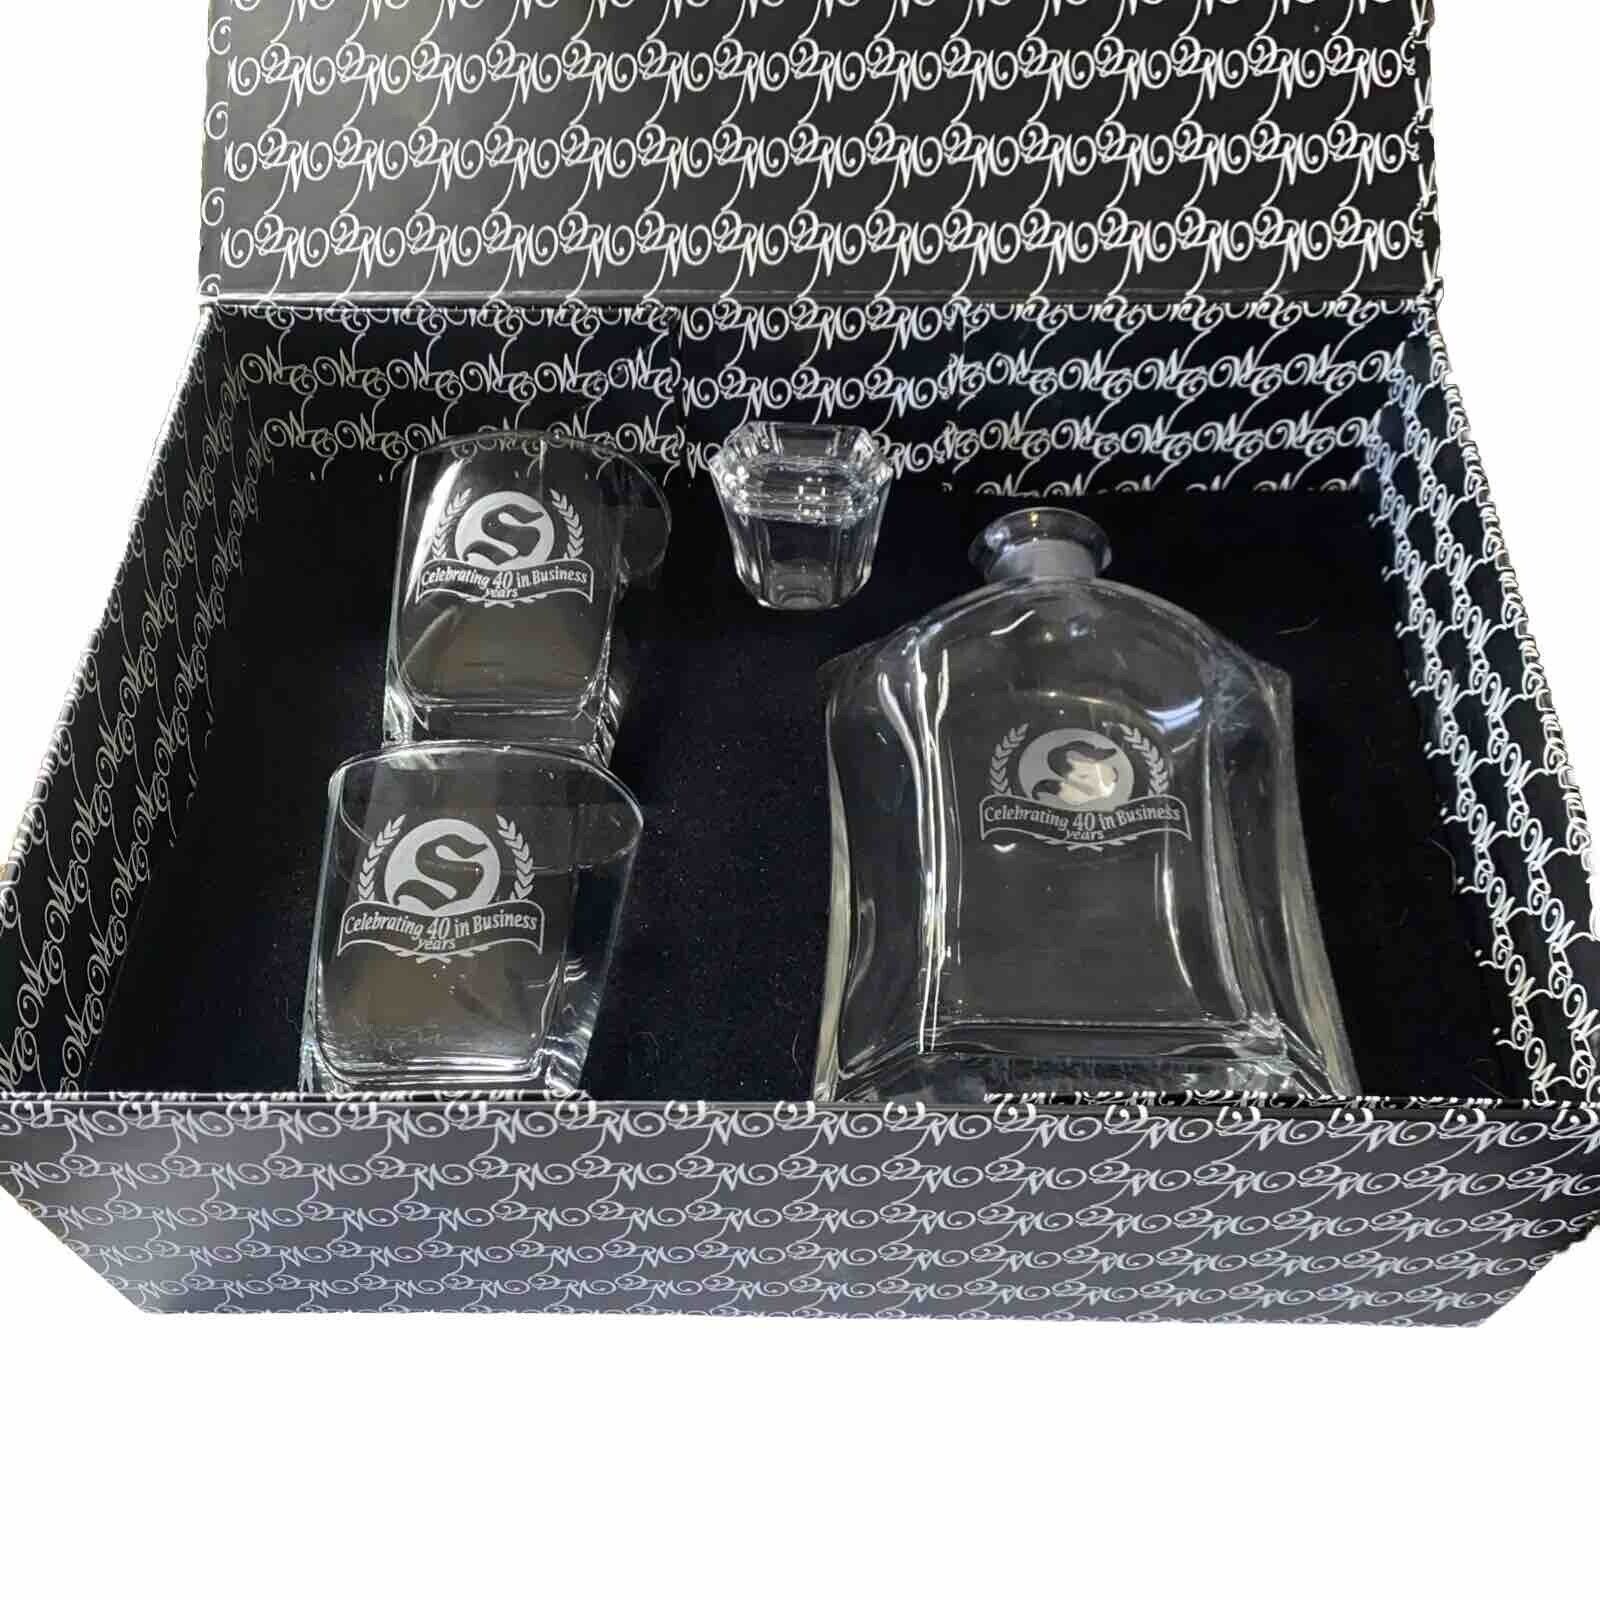 whiskey glasses decanter set With “S”Great Is way To Toast 40 Years In Business